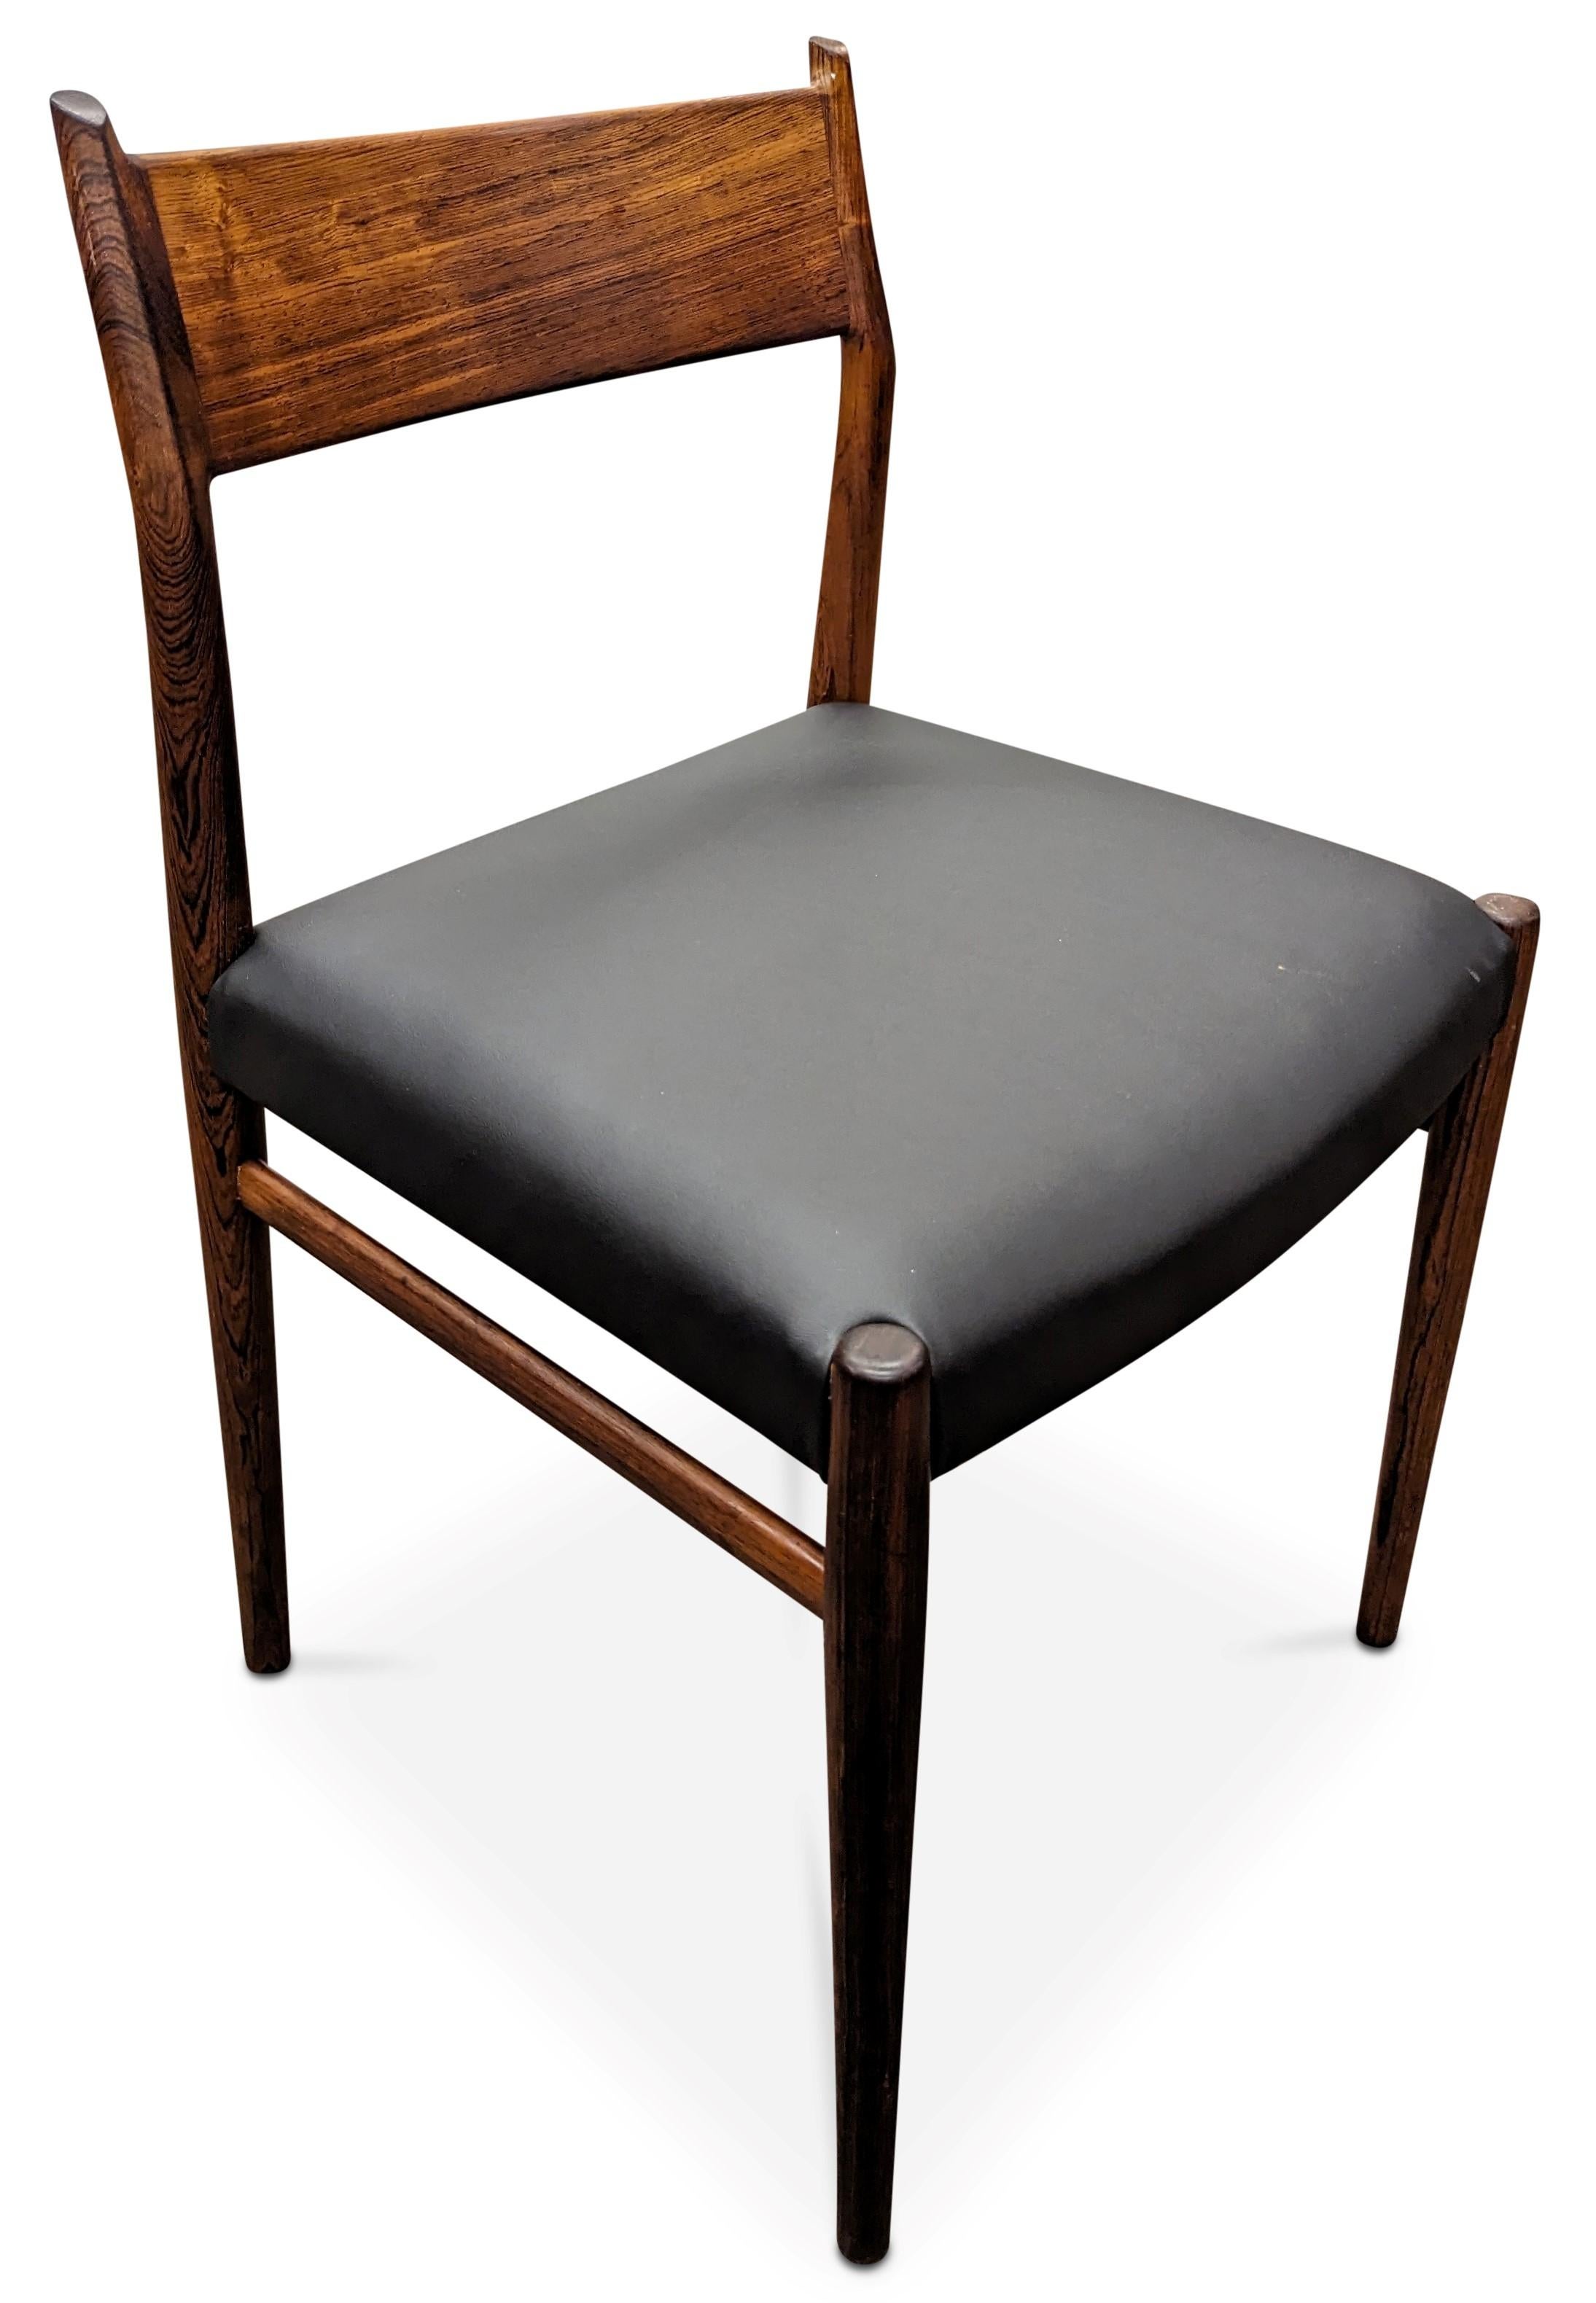 Vintage Danish Arne Vodder for Sibast Mobler Rosewood Dining Chair - 082316 In Good Condition For Sale In Jersey City, NJ